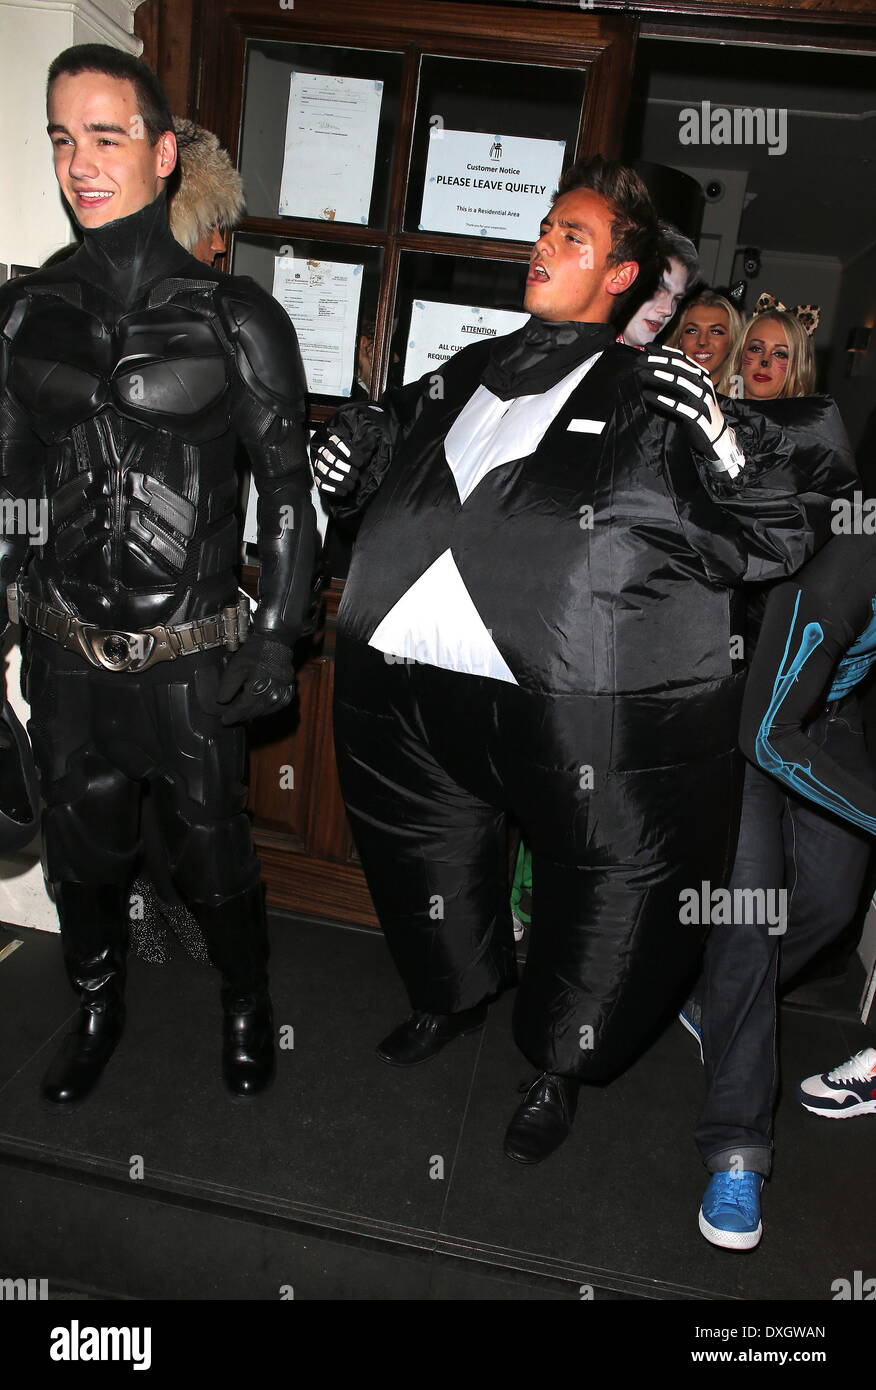 Liam Payne of One Direction dressed as Batman and Tom Daley in a fat skeleton costume Celebrities at Funky Buddha nightclub for a Halloween party London, England - 28.10.12 Where: London, LONDON, United Kingdom When: 28 Oct 2012 Stock Photo